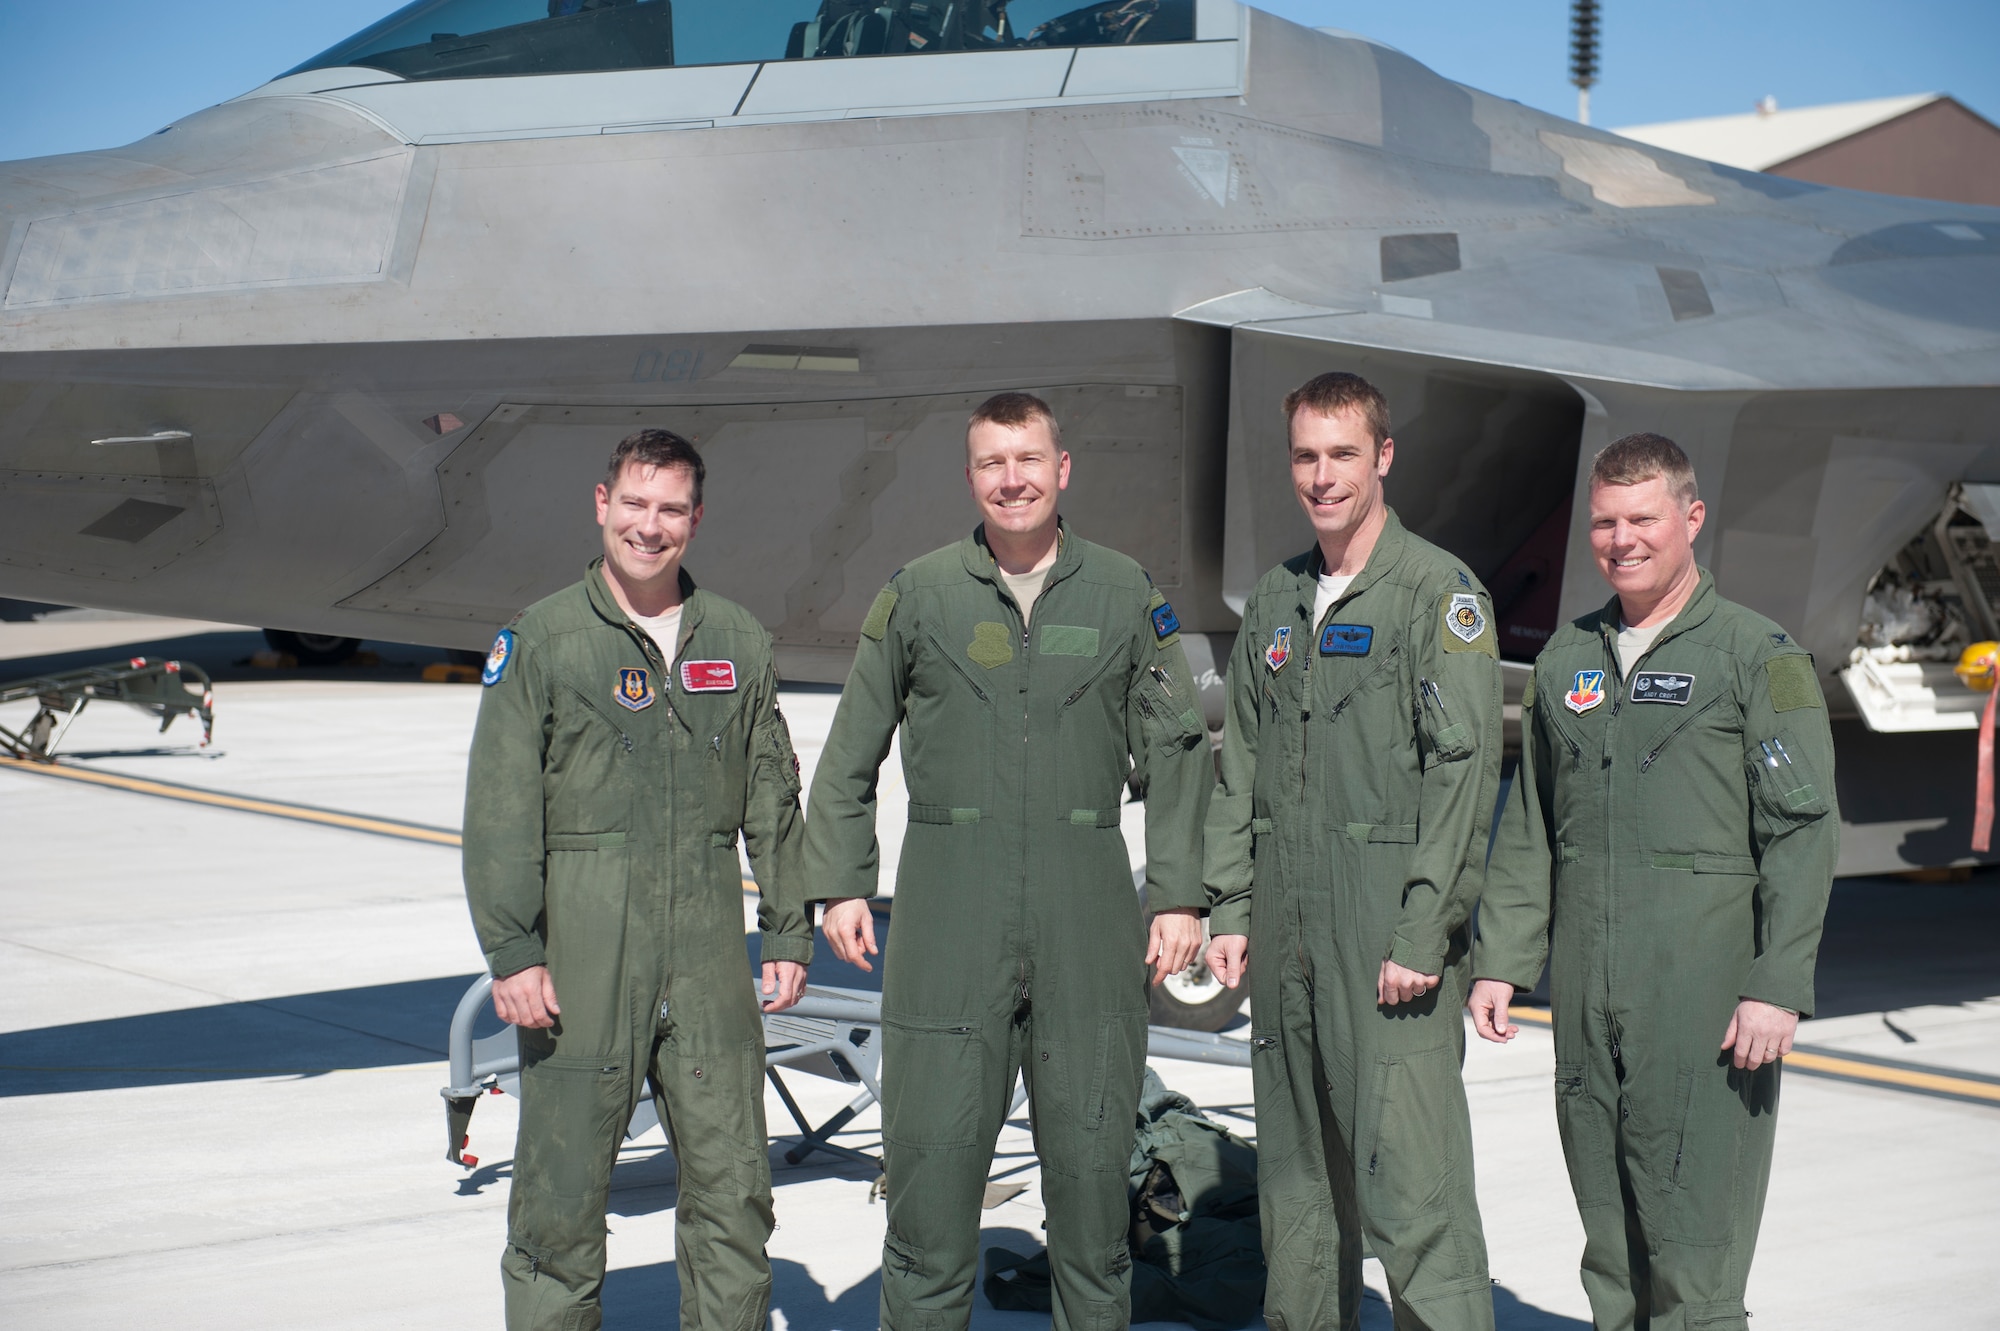 Major Jesse Colwell, F-22 Raptor pilot, Lt. Col. Shawn Anger, 7th Fighter Squadron commander, Capt. John Fischer, F-22 Raptor pilot, and Col. Andrew Croft, 49th Wing commander, stand in front of an F-22 at Holloman Air Force Base, N.M., Feb. 20. The 7th Fighter Squadron and members of the Holloman community celebrated this sortie before the F-22s depart for Tyndall Air Force Base, Fla., in early April. (U.S. Air Force photo by Airman 1st Class Daniel Liddicoet/Released)